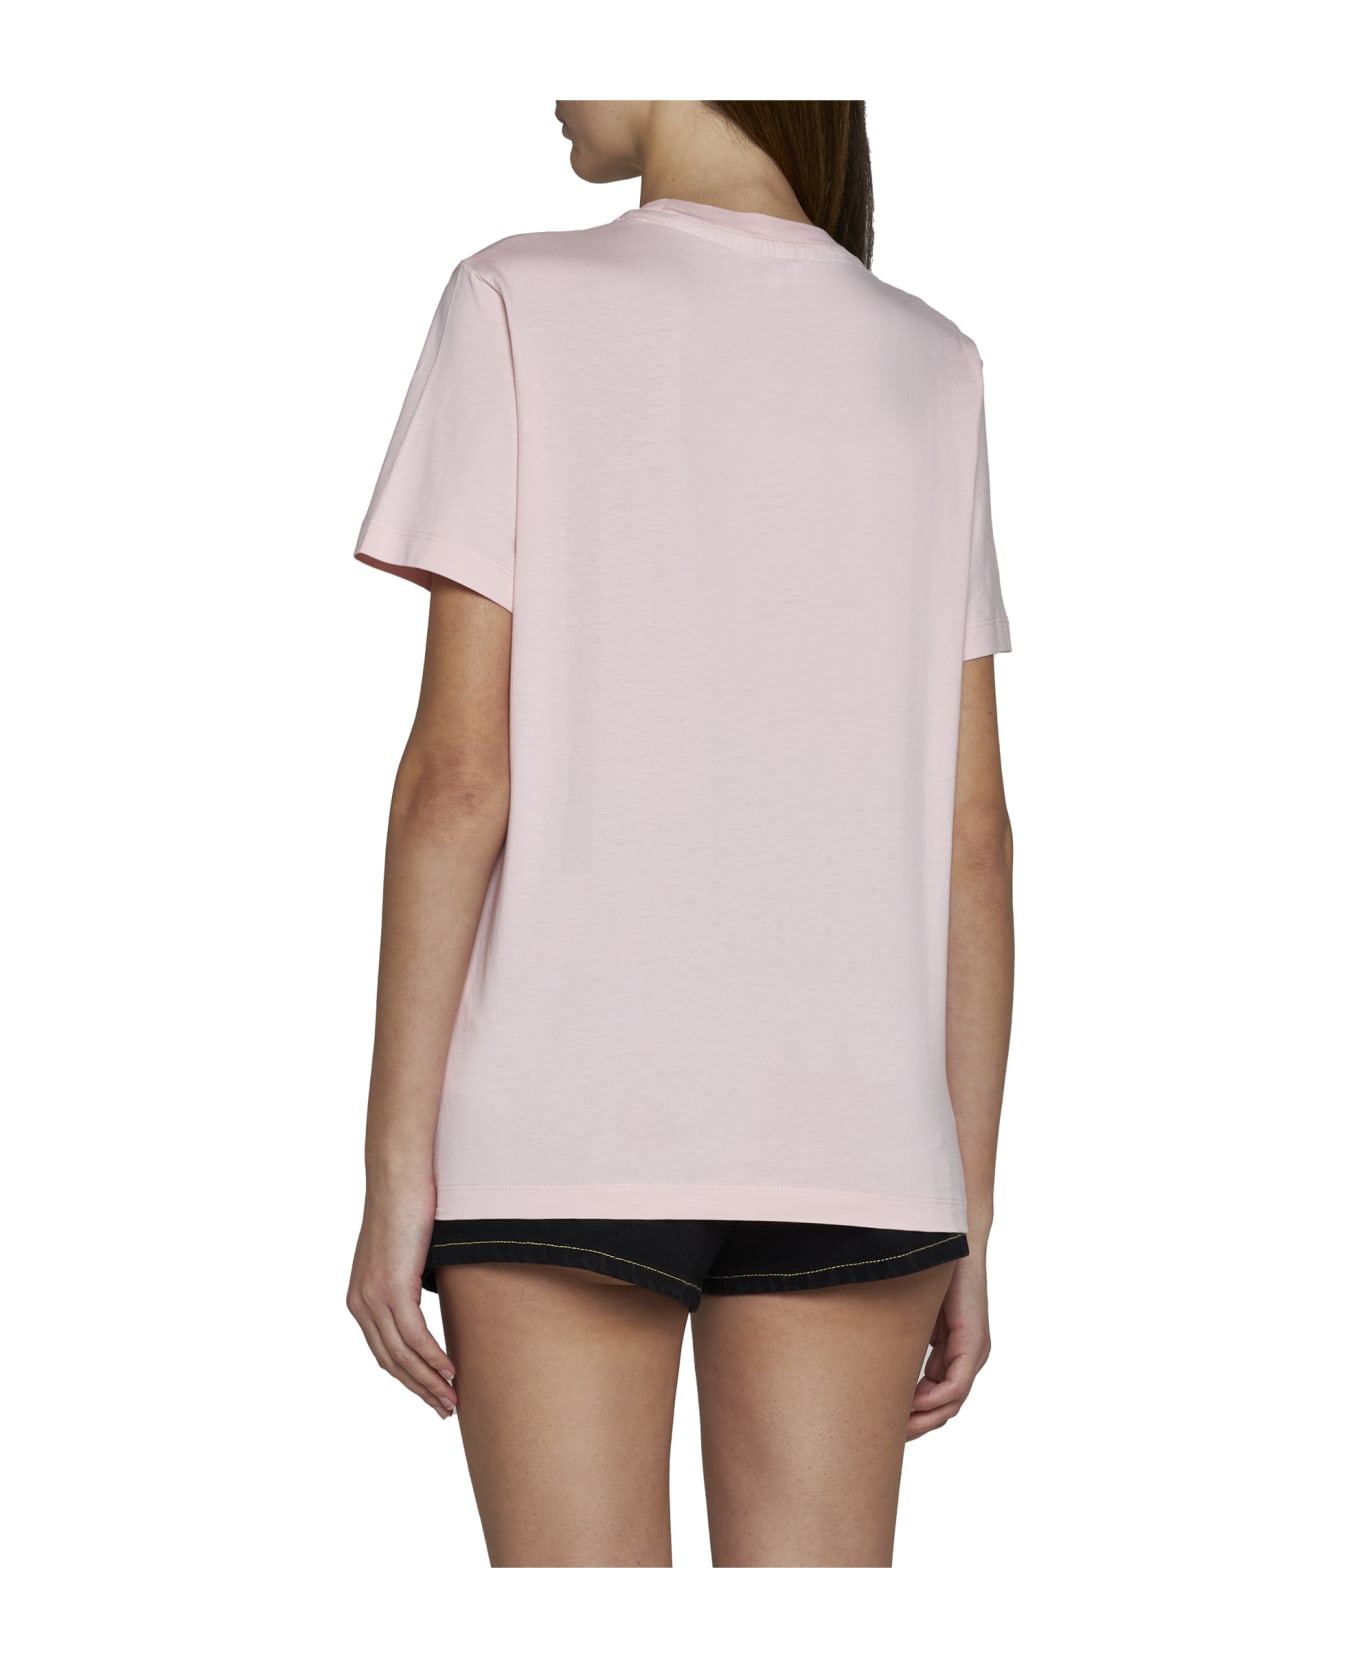 Kenzo T-Shirt - Faded pink